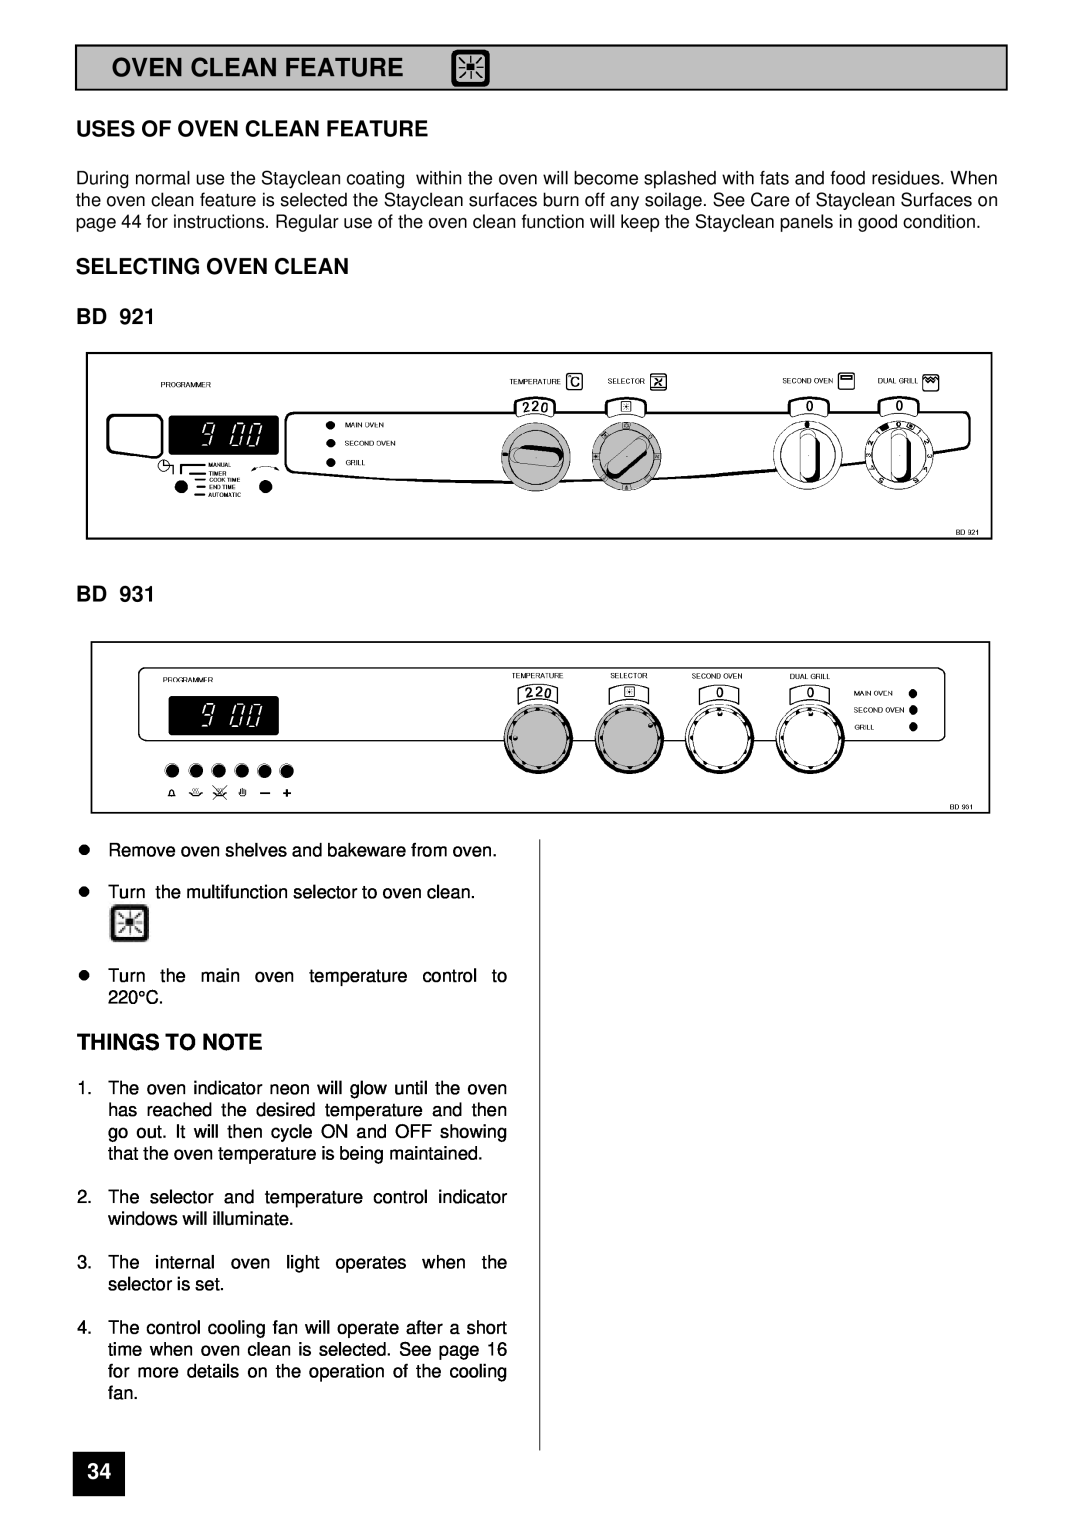 Tricity Bendix BD 921 installation instructions Uses Of Oven Clean Feature, Selecting Oven Clean Bd Bd, Things To Note 